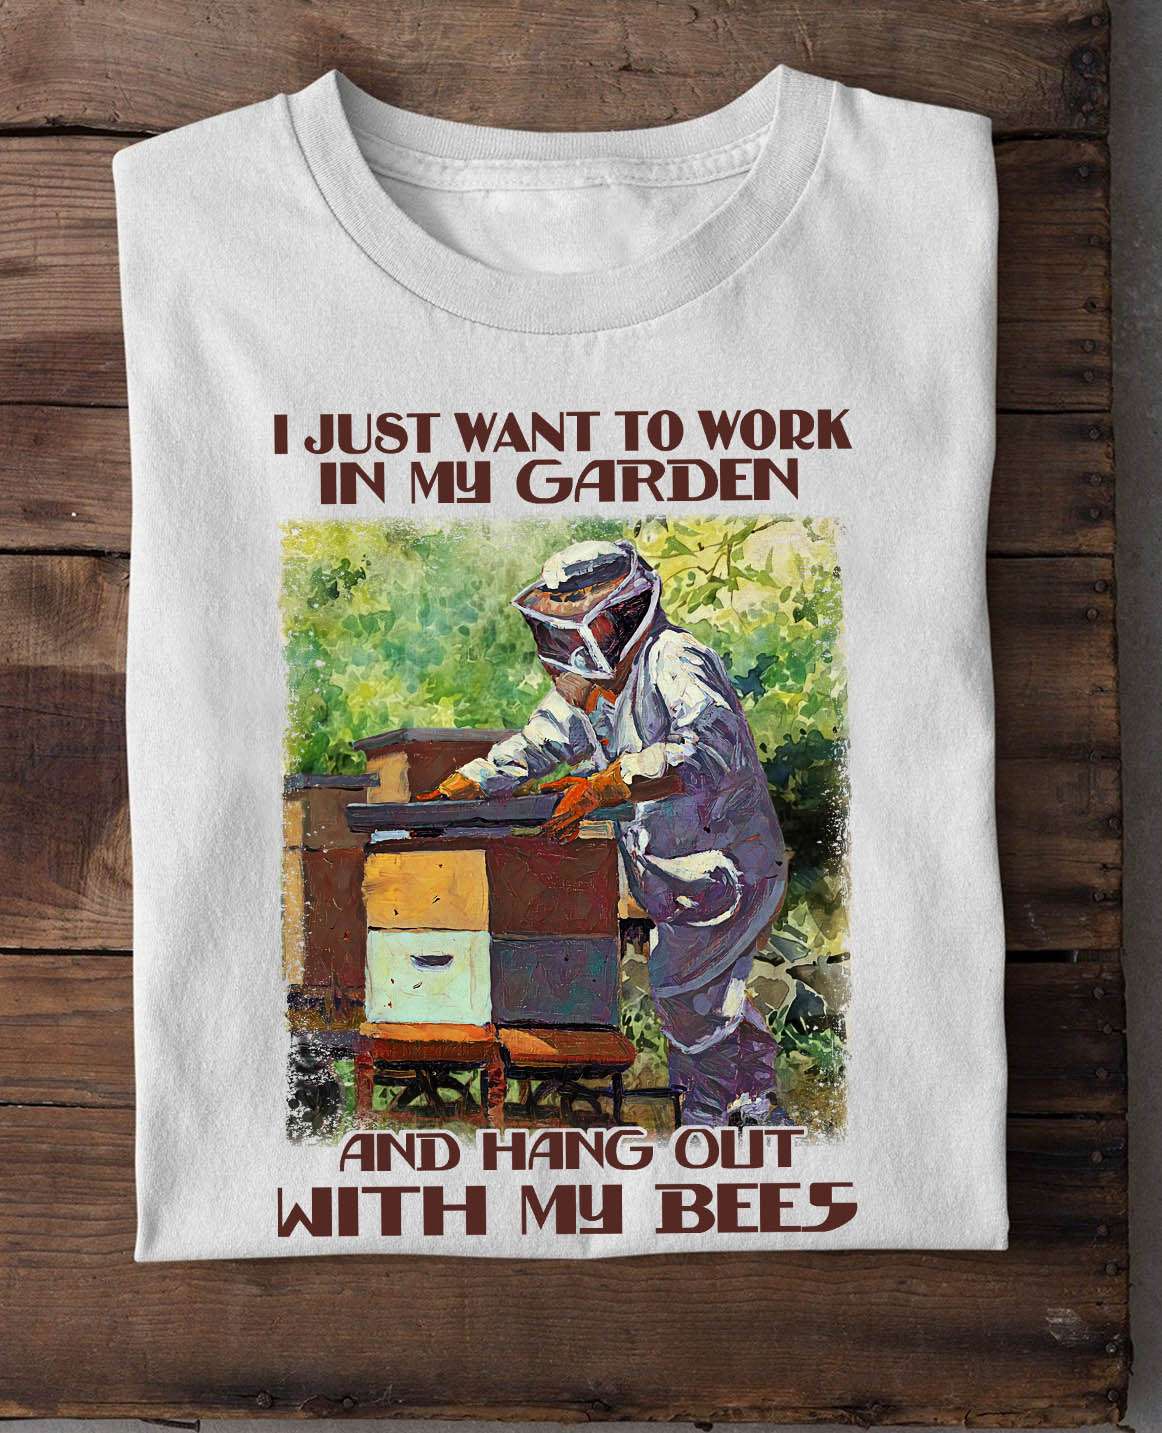 Love Gardening - I just want to work in my garden and hang out with my bees